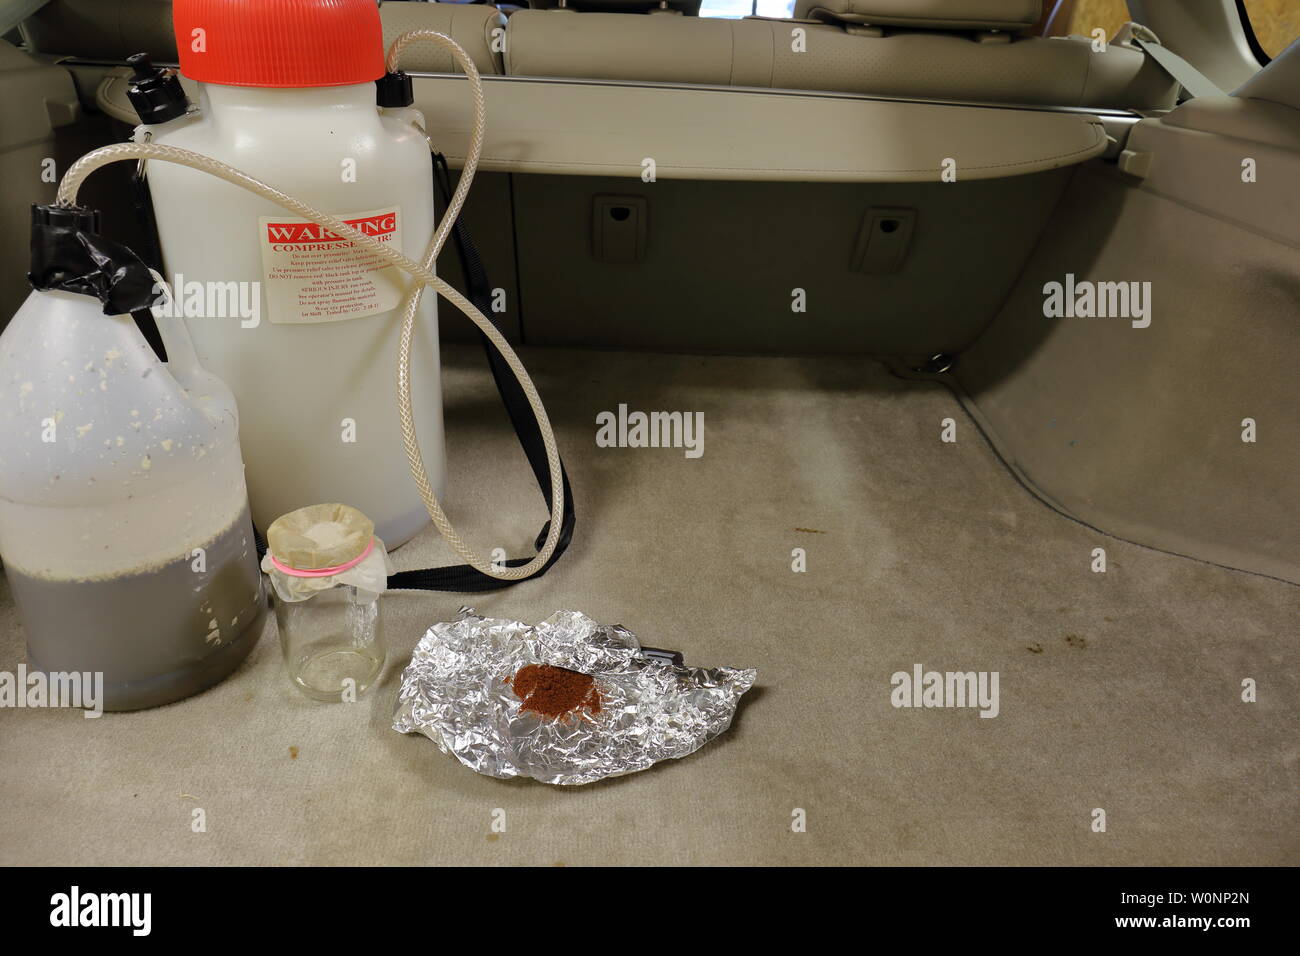 Supplies and chemicals used to manufacture methamphetamine in the back of a vehicle Stock Photo